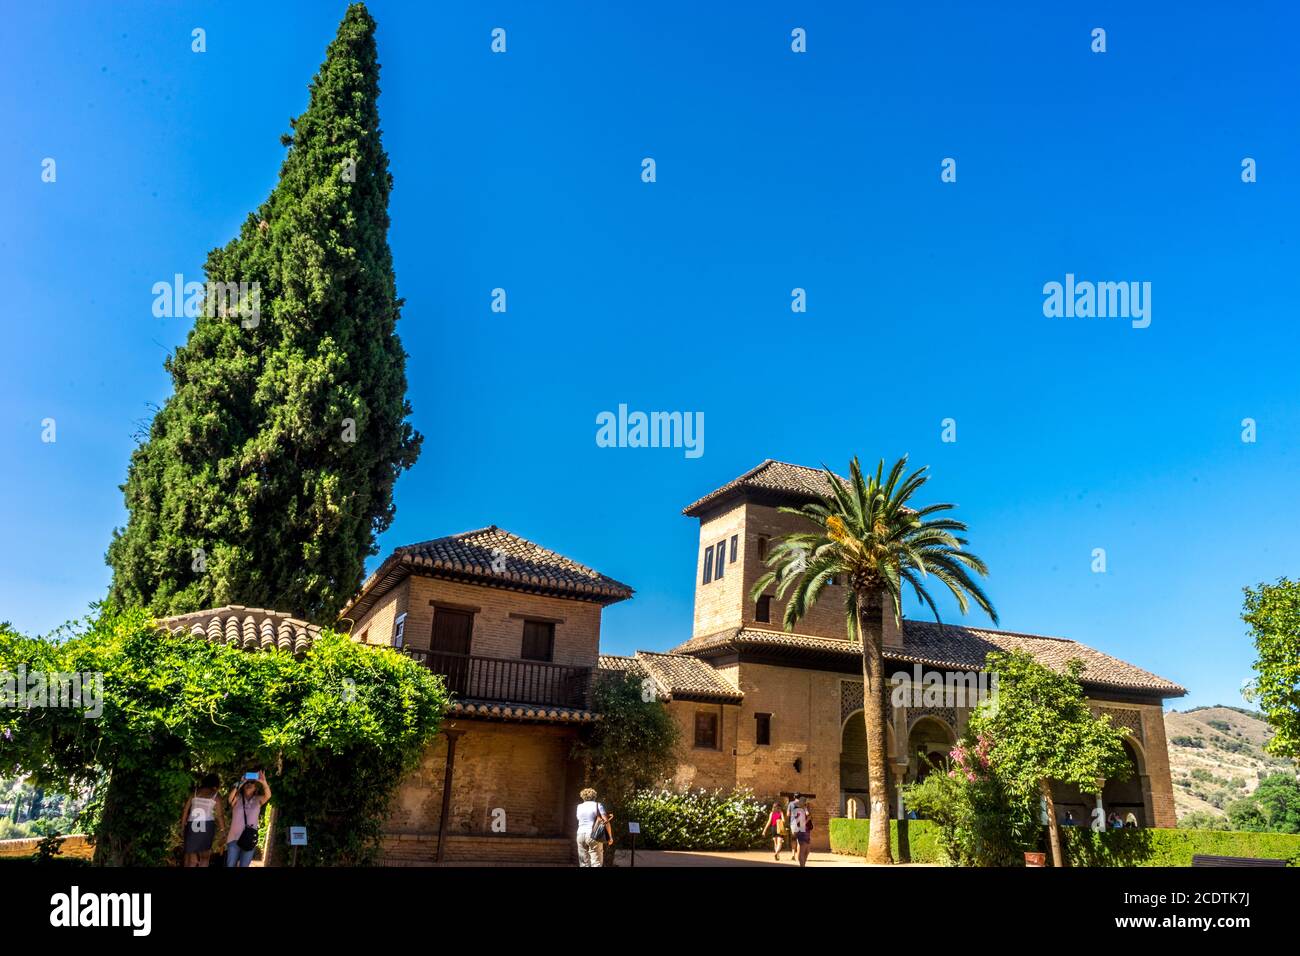 El Partal. A large tree stands next to the Tower of the Ladies, inside the Alhambra of Granada, Andalusia, Spain, Europe Stock Photo